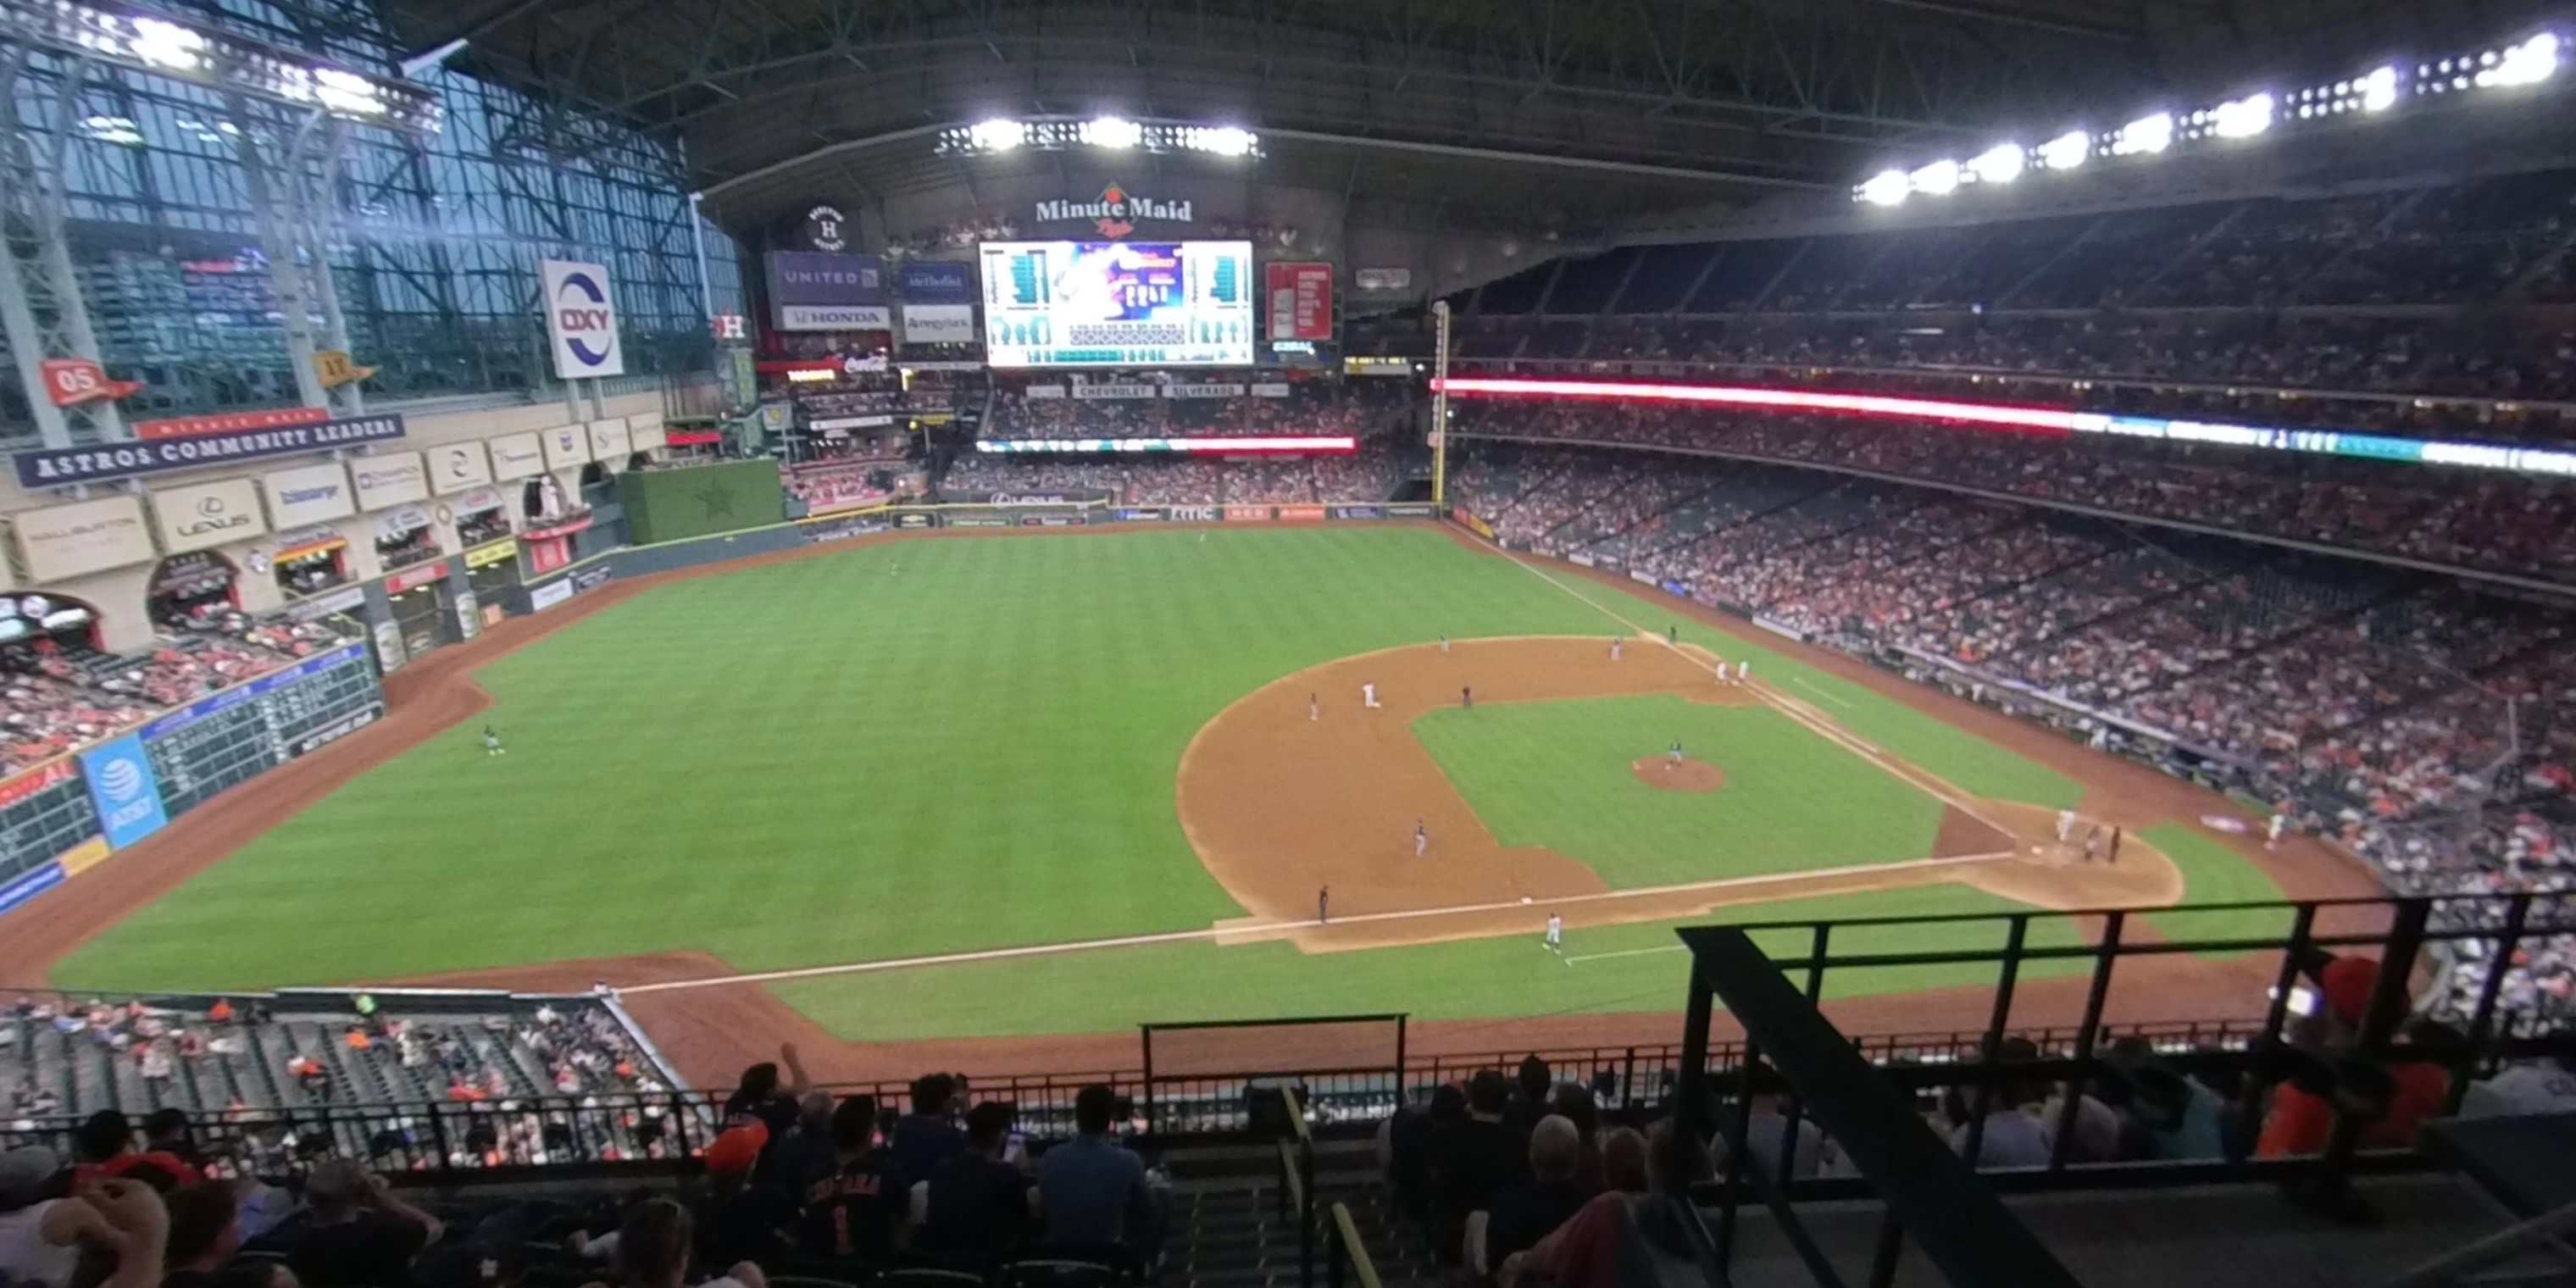 section 310 panoramic seat view  for baseball - minute maid park